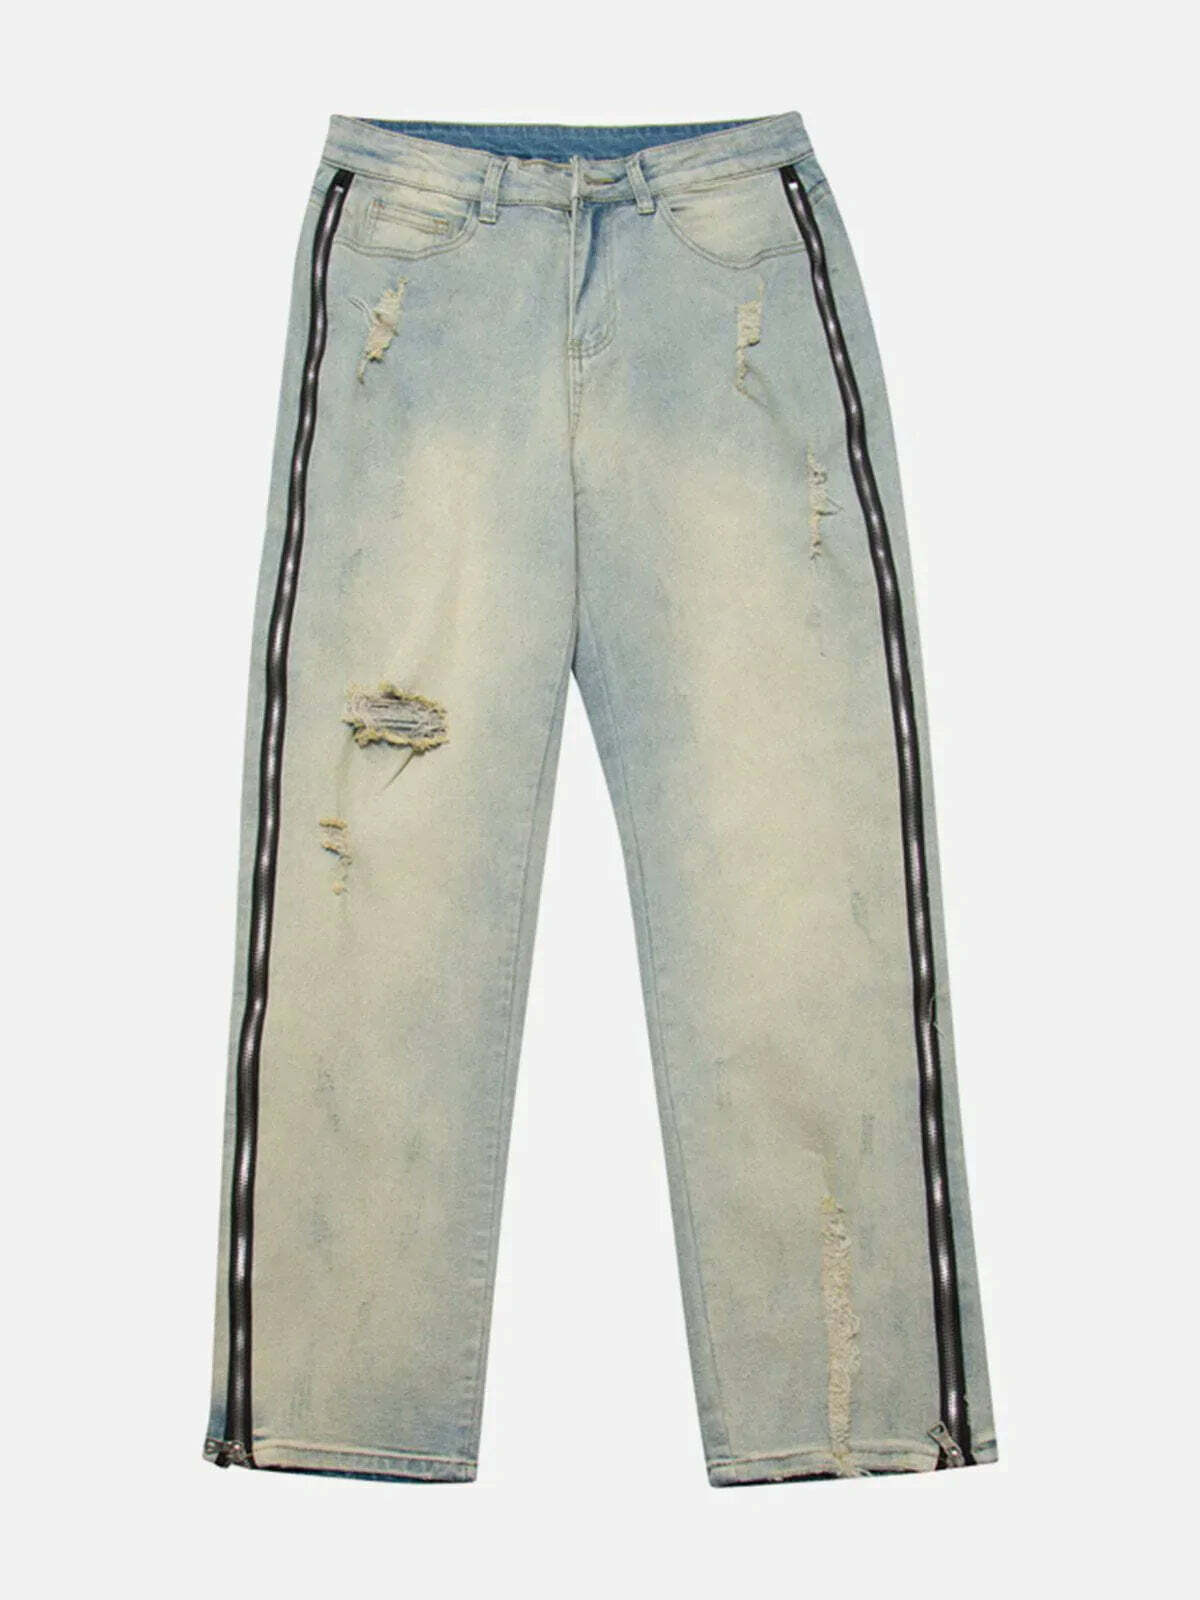 washed zip design jeans edgy & retro streetwear 4848